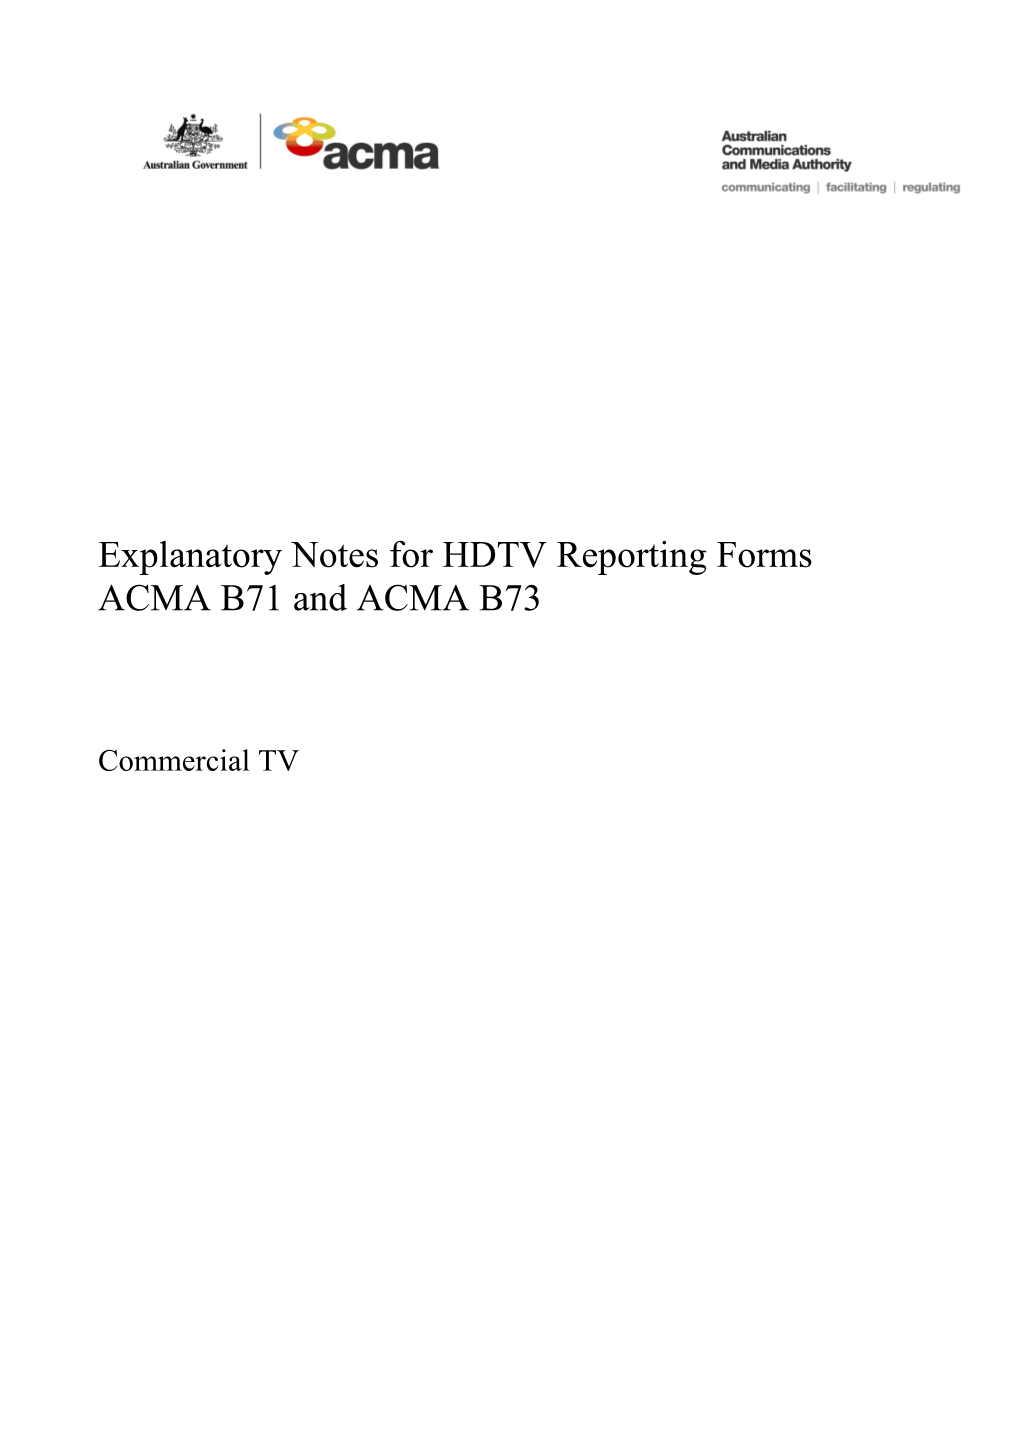 Explanatory Note for HTDV Reporting Forms ACMA B71 & B73